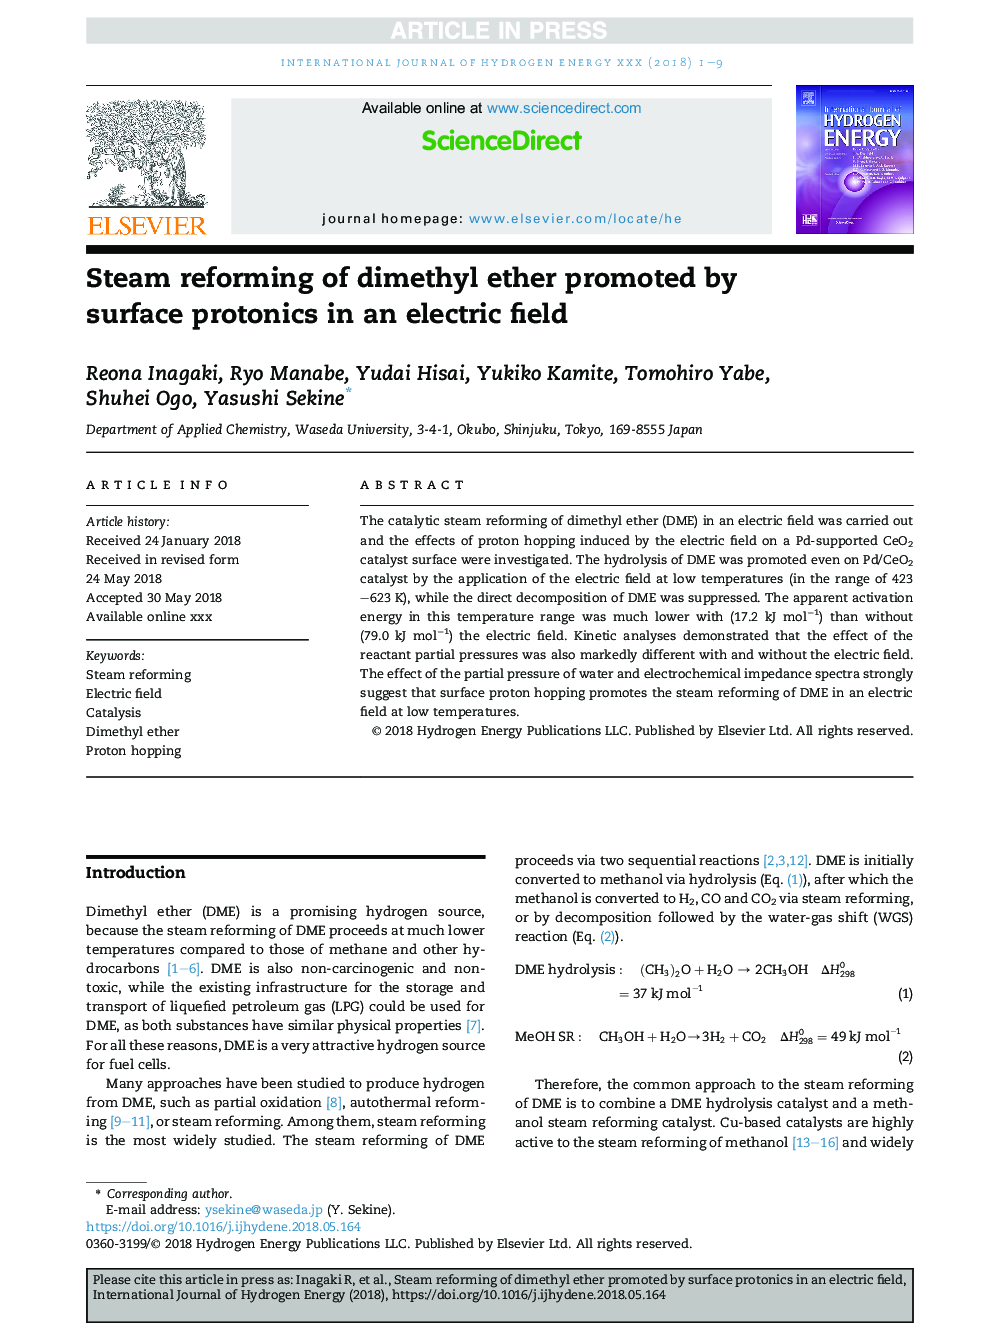 Steam reforming of dimethyl ether promoted by surface protonics in an electric field